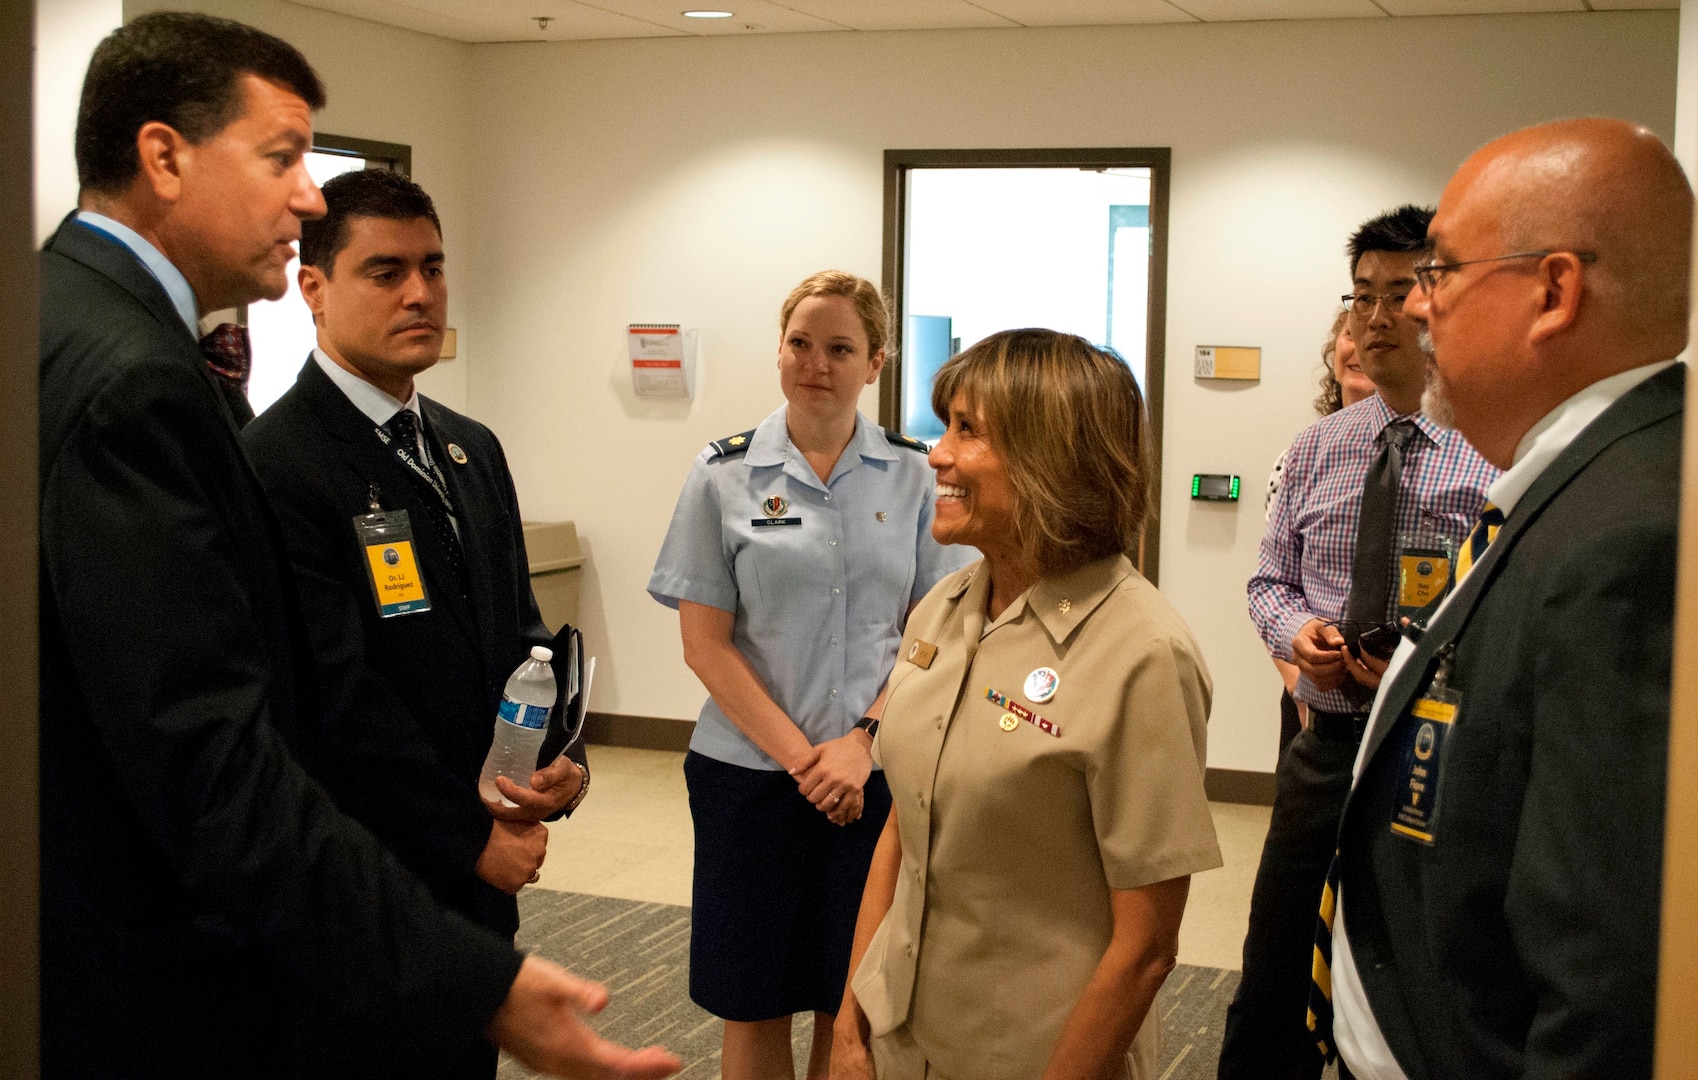 IMAGE: KING GEORGE, Va. (Aug. 29, 2018) – James Smerchansky, Dr. Luis Rodriguez, Air Force Maj. Amanda Clark, Navy Vice Adm. Raquel Bono, Ray Cho, and John Fiore, left to right, discuss diversity at the first Leadership in a Diverse Environment Training Event hosted by Naval Surface Warfare Center Dahlgren Division (NSWCDD). Smerchansky - Naval Sea Systems Command (NAVSEA) executive director - spoke to participants about diversity and inclusion. Bono – director of the Defense Health Agency – briefed on how to “Lead Where You Are to Inspire, Engage, and Innovate”. Fiore - NSWCDD technical director – kicked off the two-day event with his opening remarks, and joined NSWCDD Commanding Officer Capt. Godfrey ‘Gus’ Weekes to encourage participants on the second day with a talk called “Extend the Challenge”. The training event featured a wide spectrum of presentations and discussion panels focusing on the challenges and opportunities facing today’s leadership.